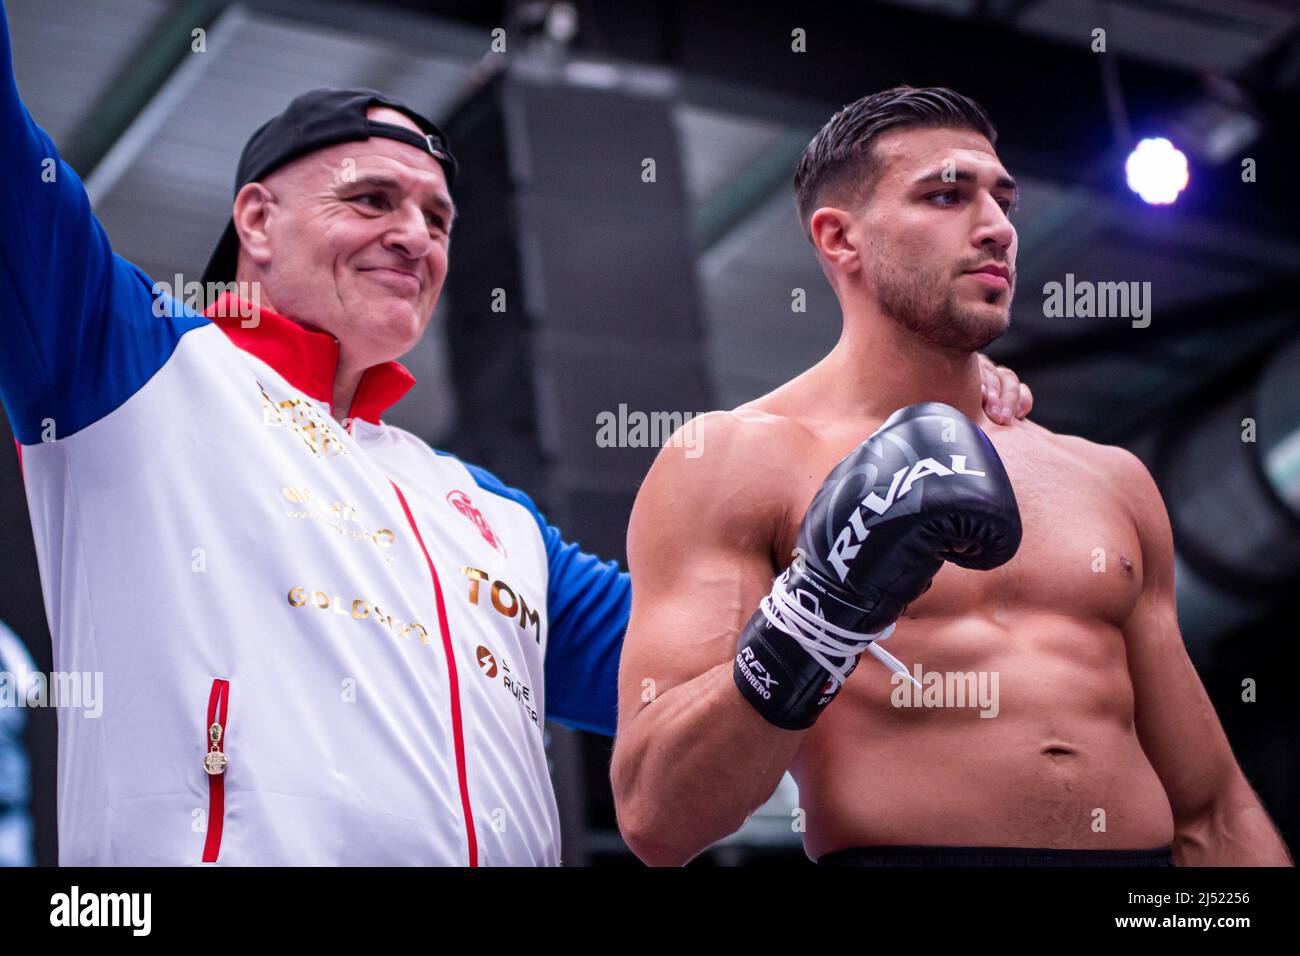 London, England - APRIL 19: Tommy Fury hits pads with his father, John Fury during the Open Workout prior to Fury vs Whyte for the WBC Heavyweight Title on April 23, 2022 at Wembley Stadium in London, England, United Kingdom. (Photo by Matt Davies/PxImages) Credit: Px Images/Alamy Live News Stock Photo